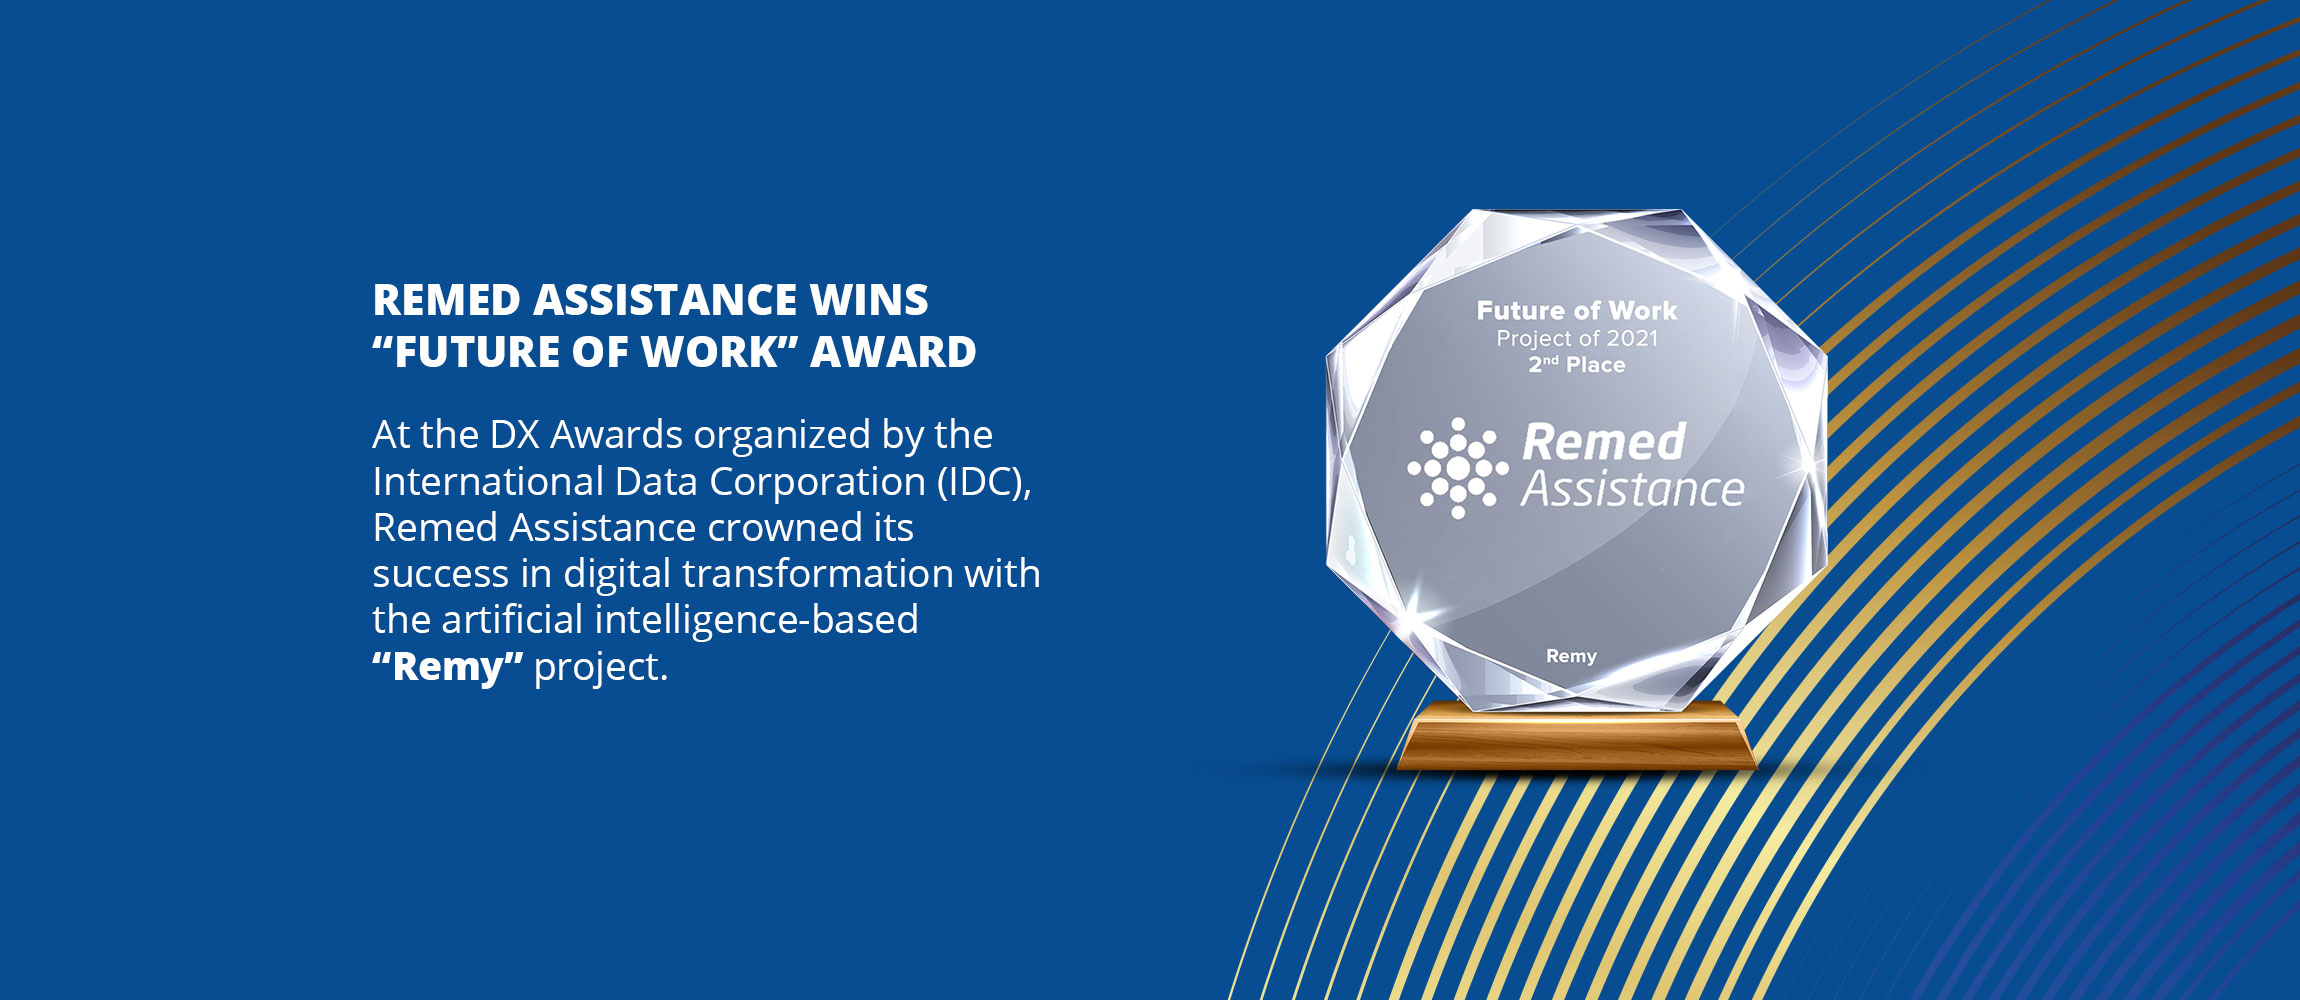 Remed Assistance wins Future of Work award